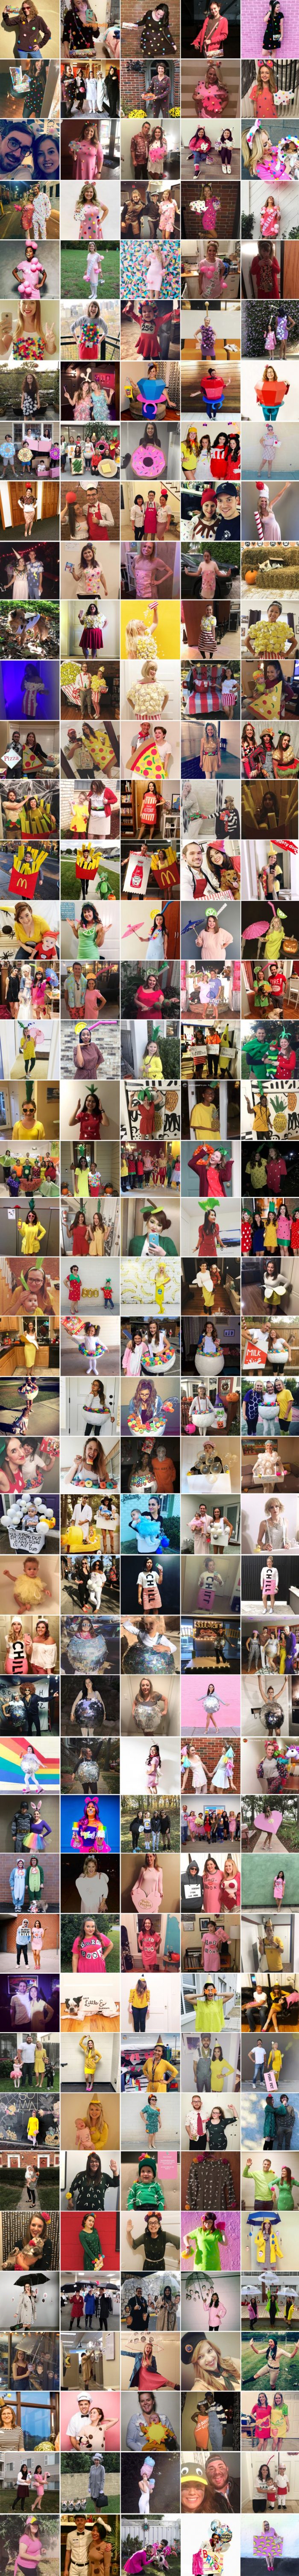 collage of people in costumes